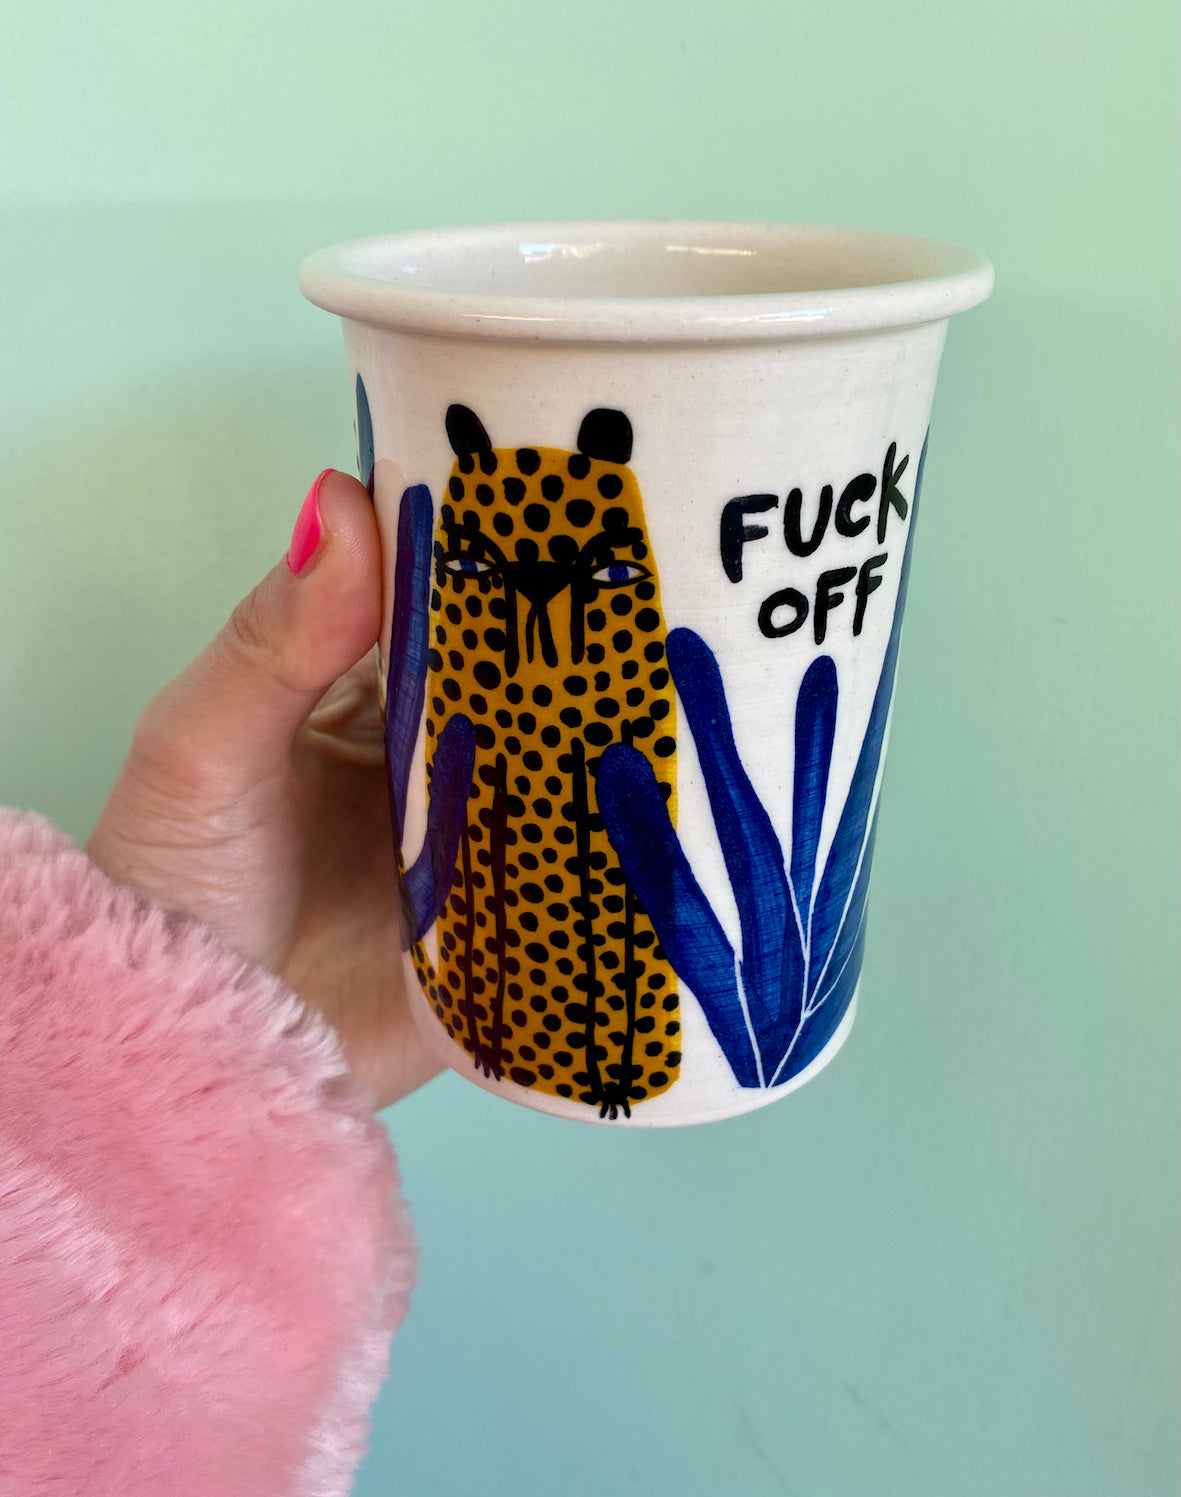 The Fuck Off cup